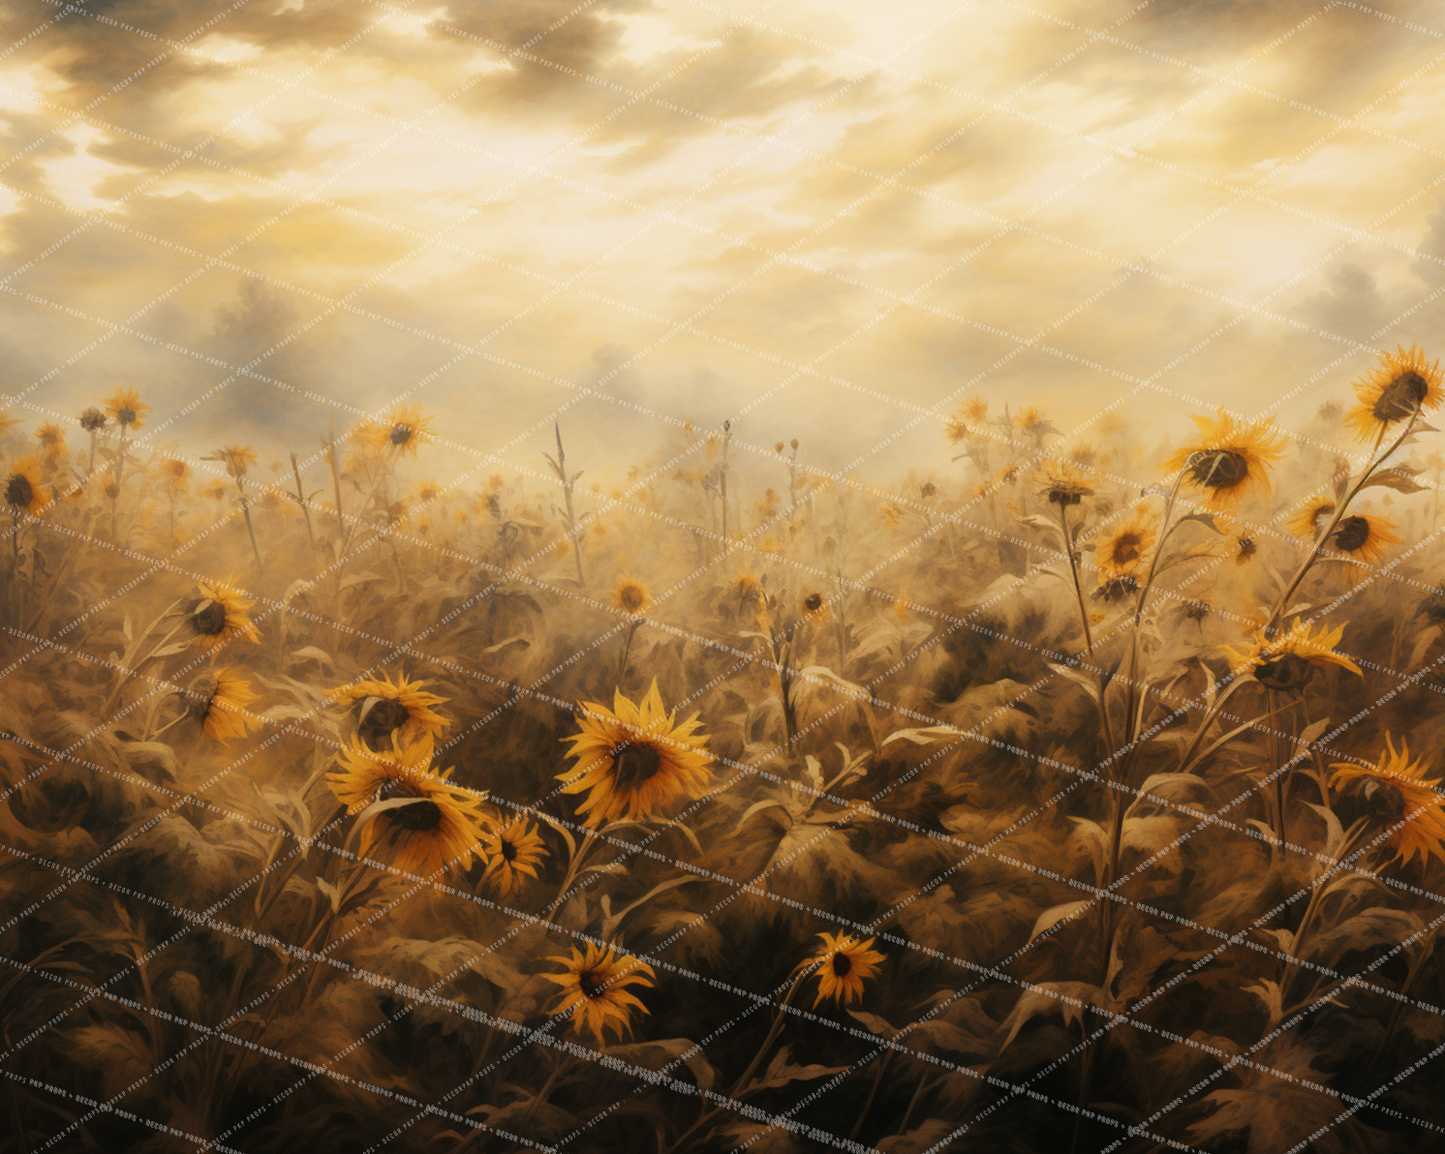 PAINTED SUNFLOWERS - PKP